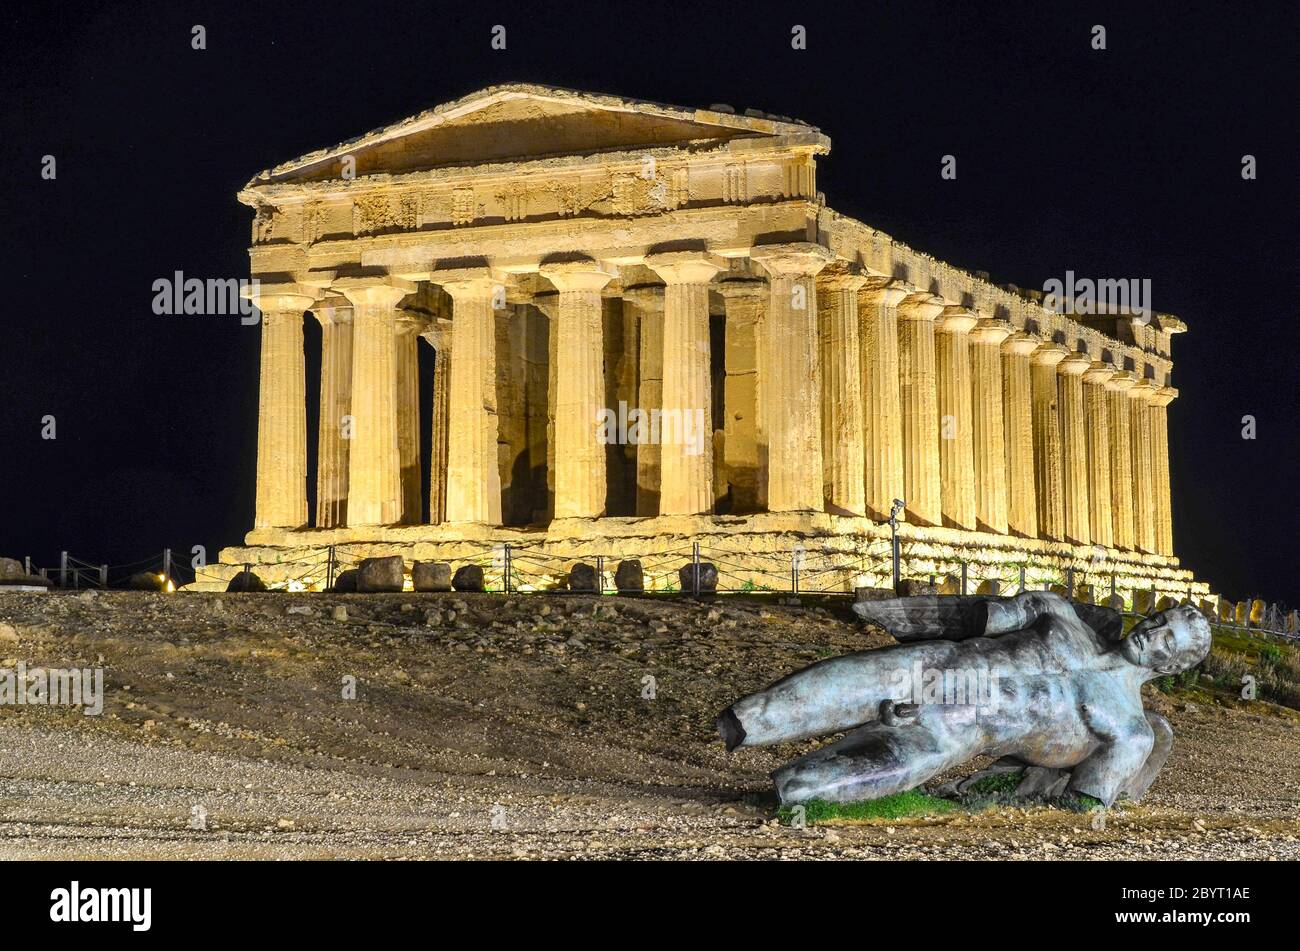 Icarus fallen from the sky, at the Temple of Concordia, Sicily, Italy Stock Photo